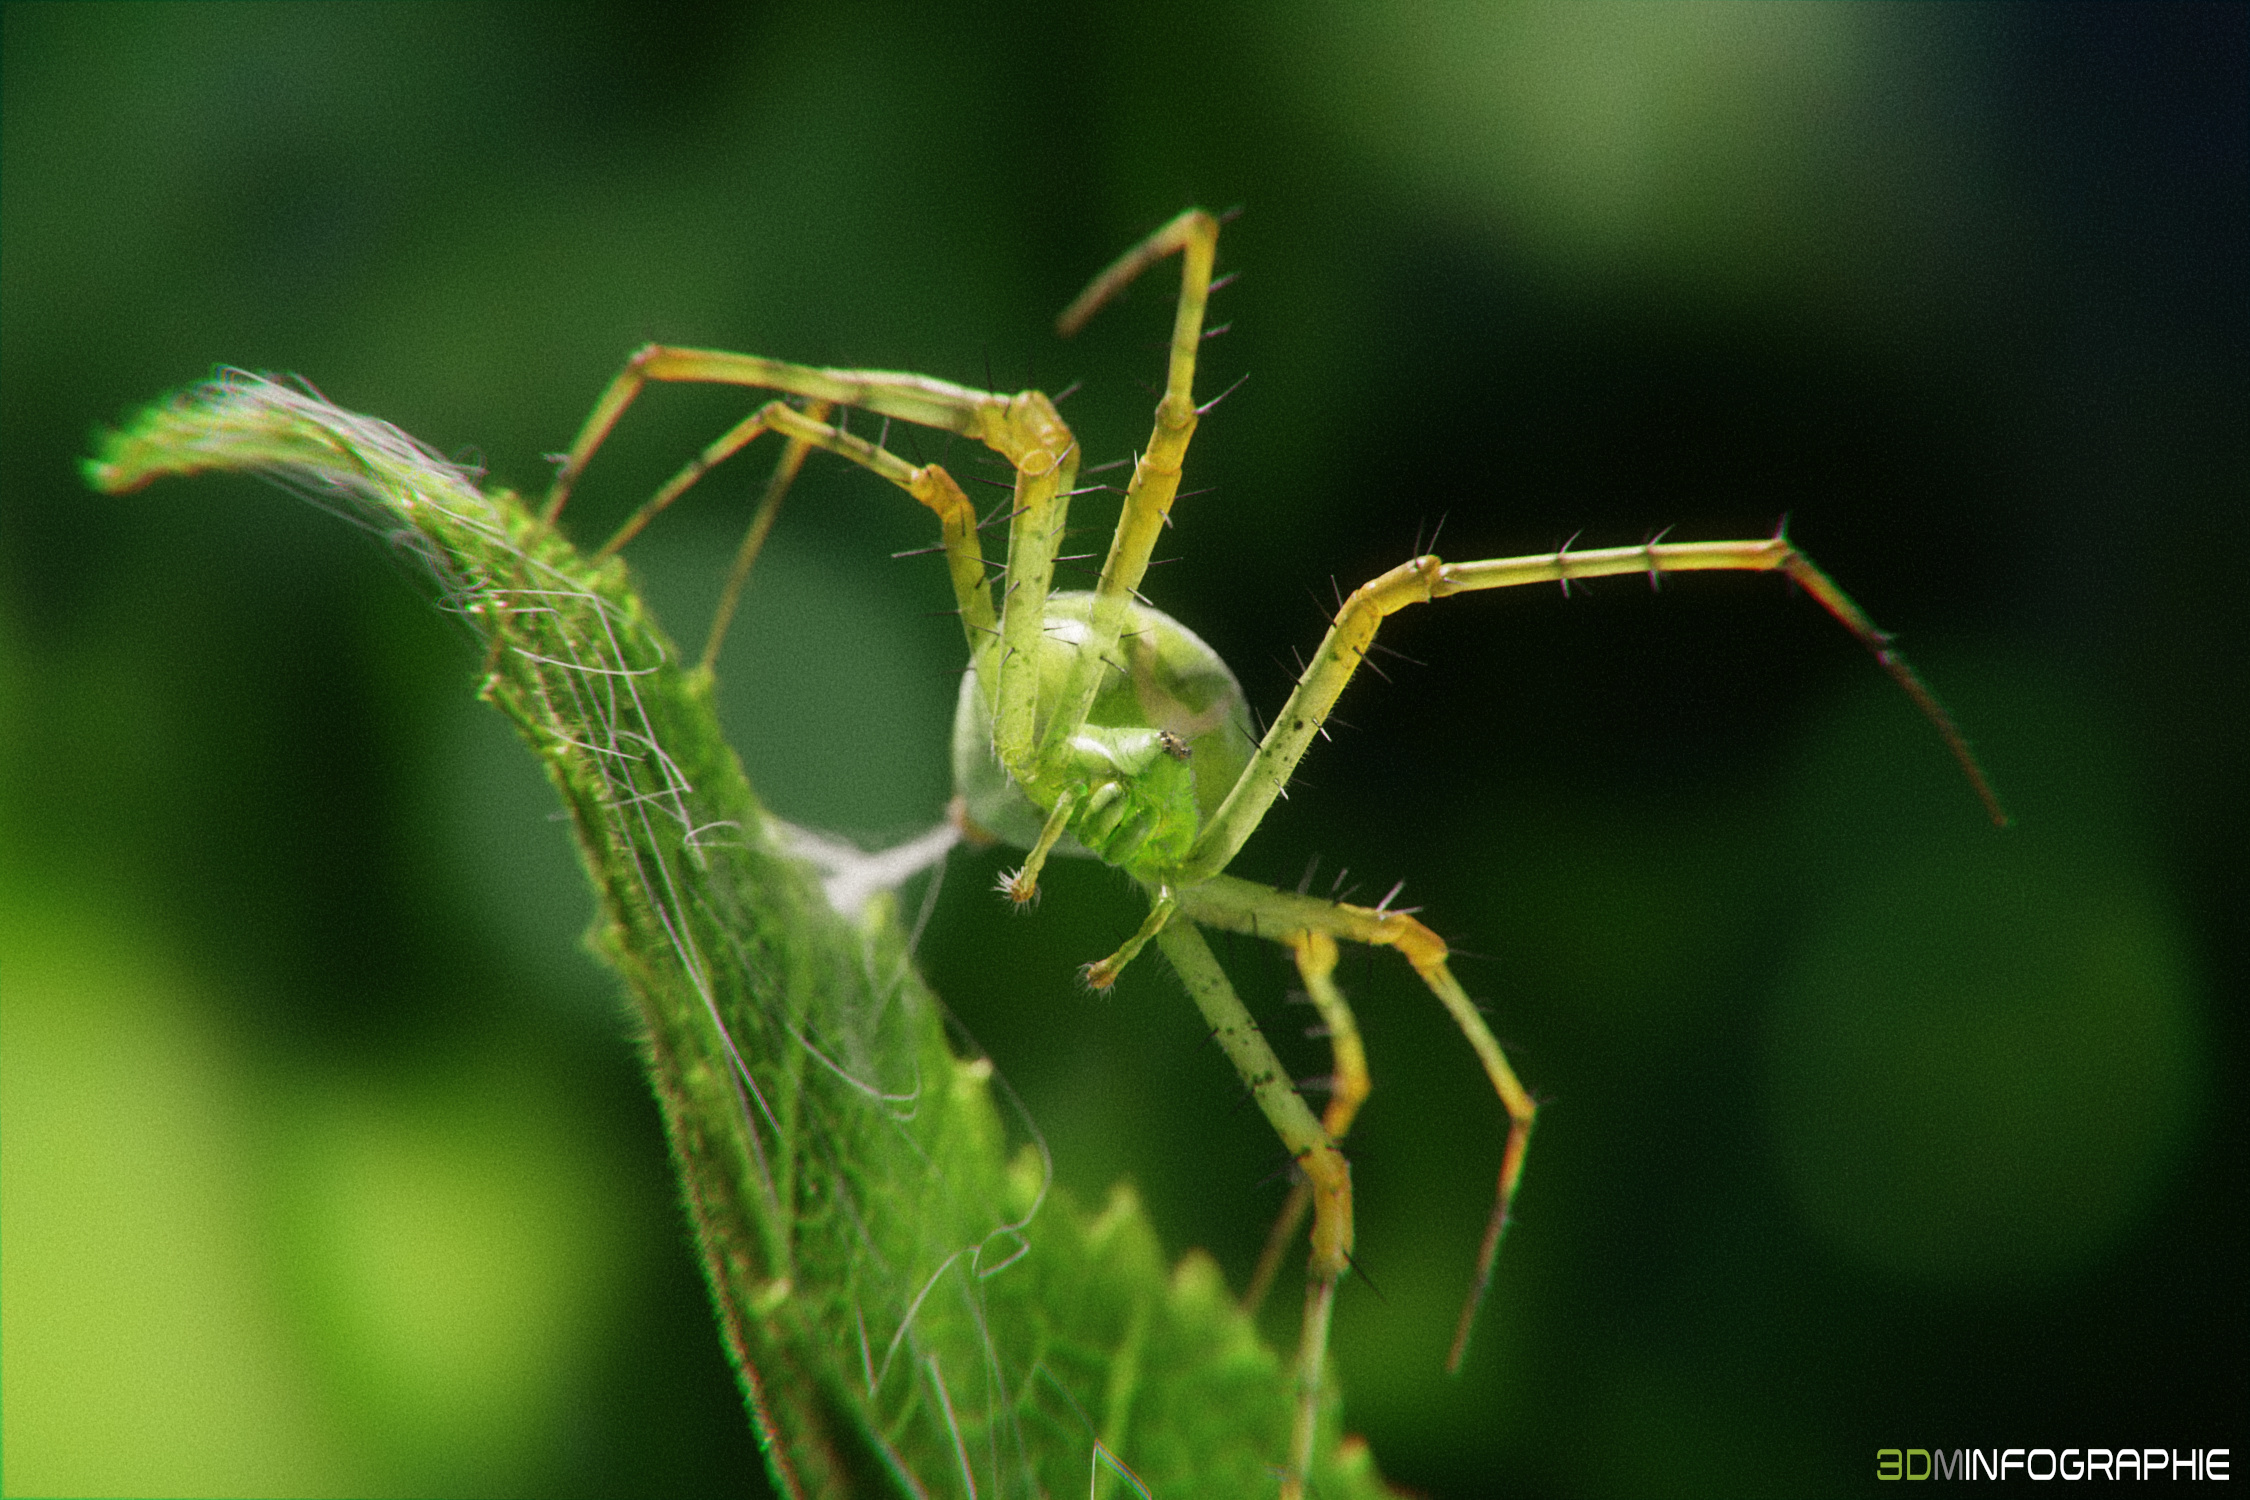 images/graphisme-3d/animaux/lynx_spider